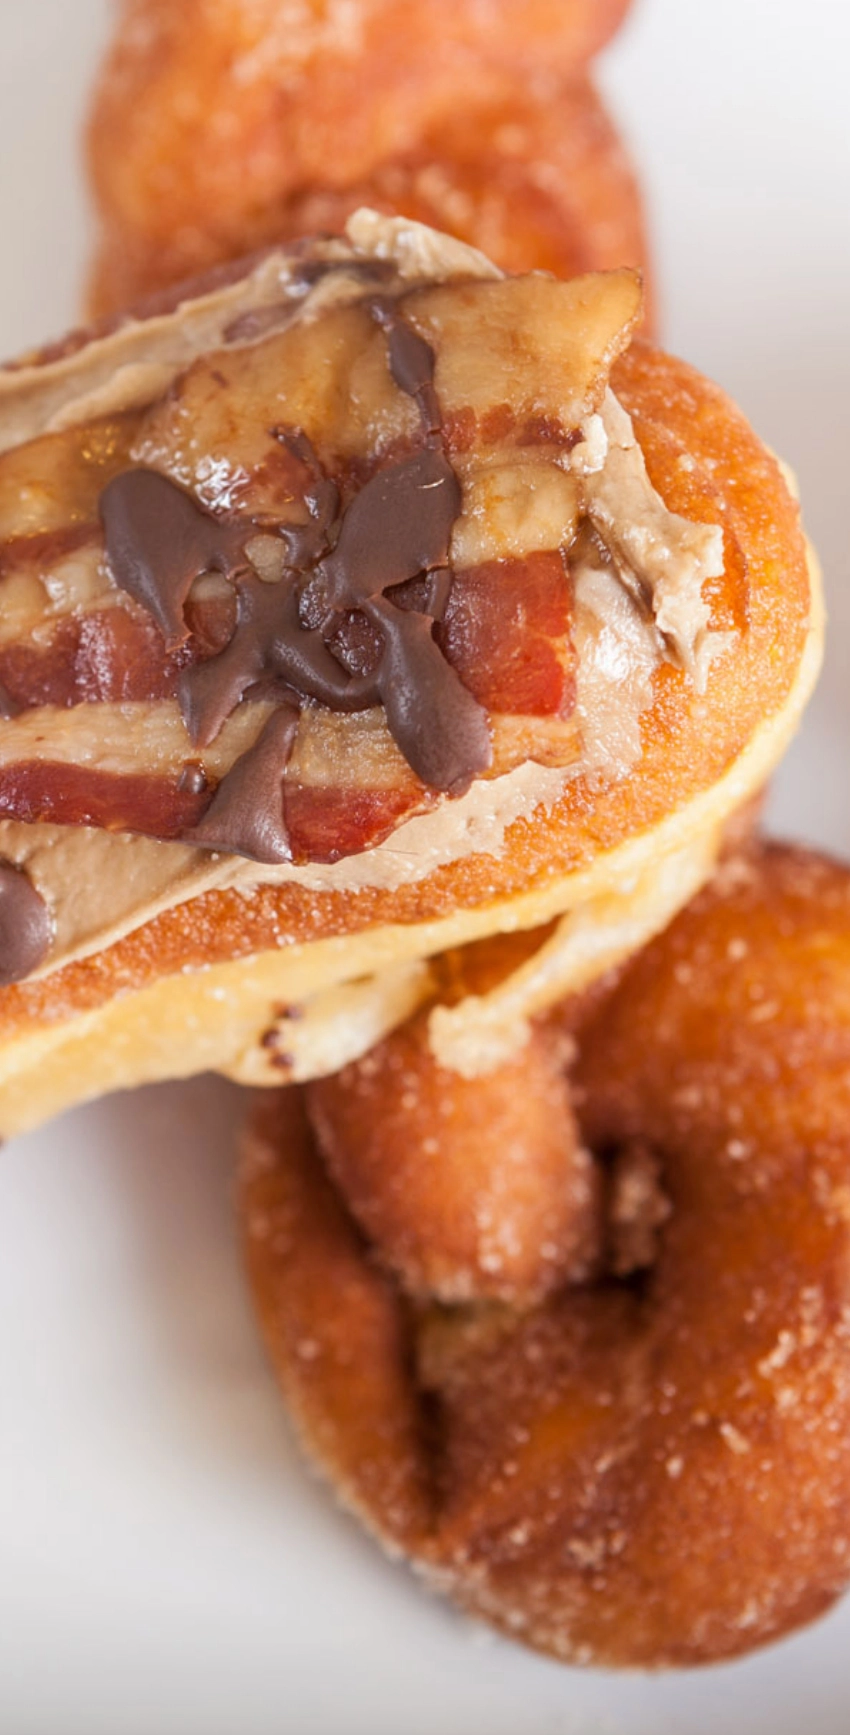 A close-up of a donut topped with bacon, chocolate drizzle, and what appears to be peanut butter. Other plain sugar-coated donuts can be seen in the background.